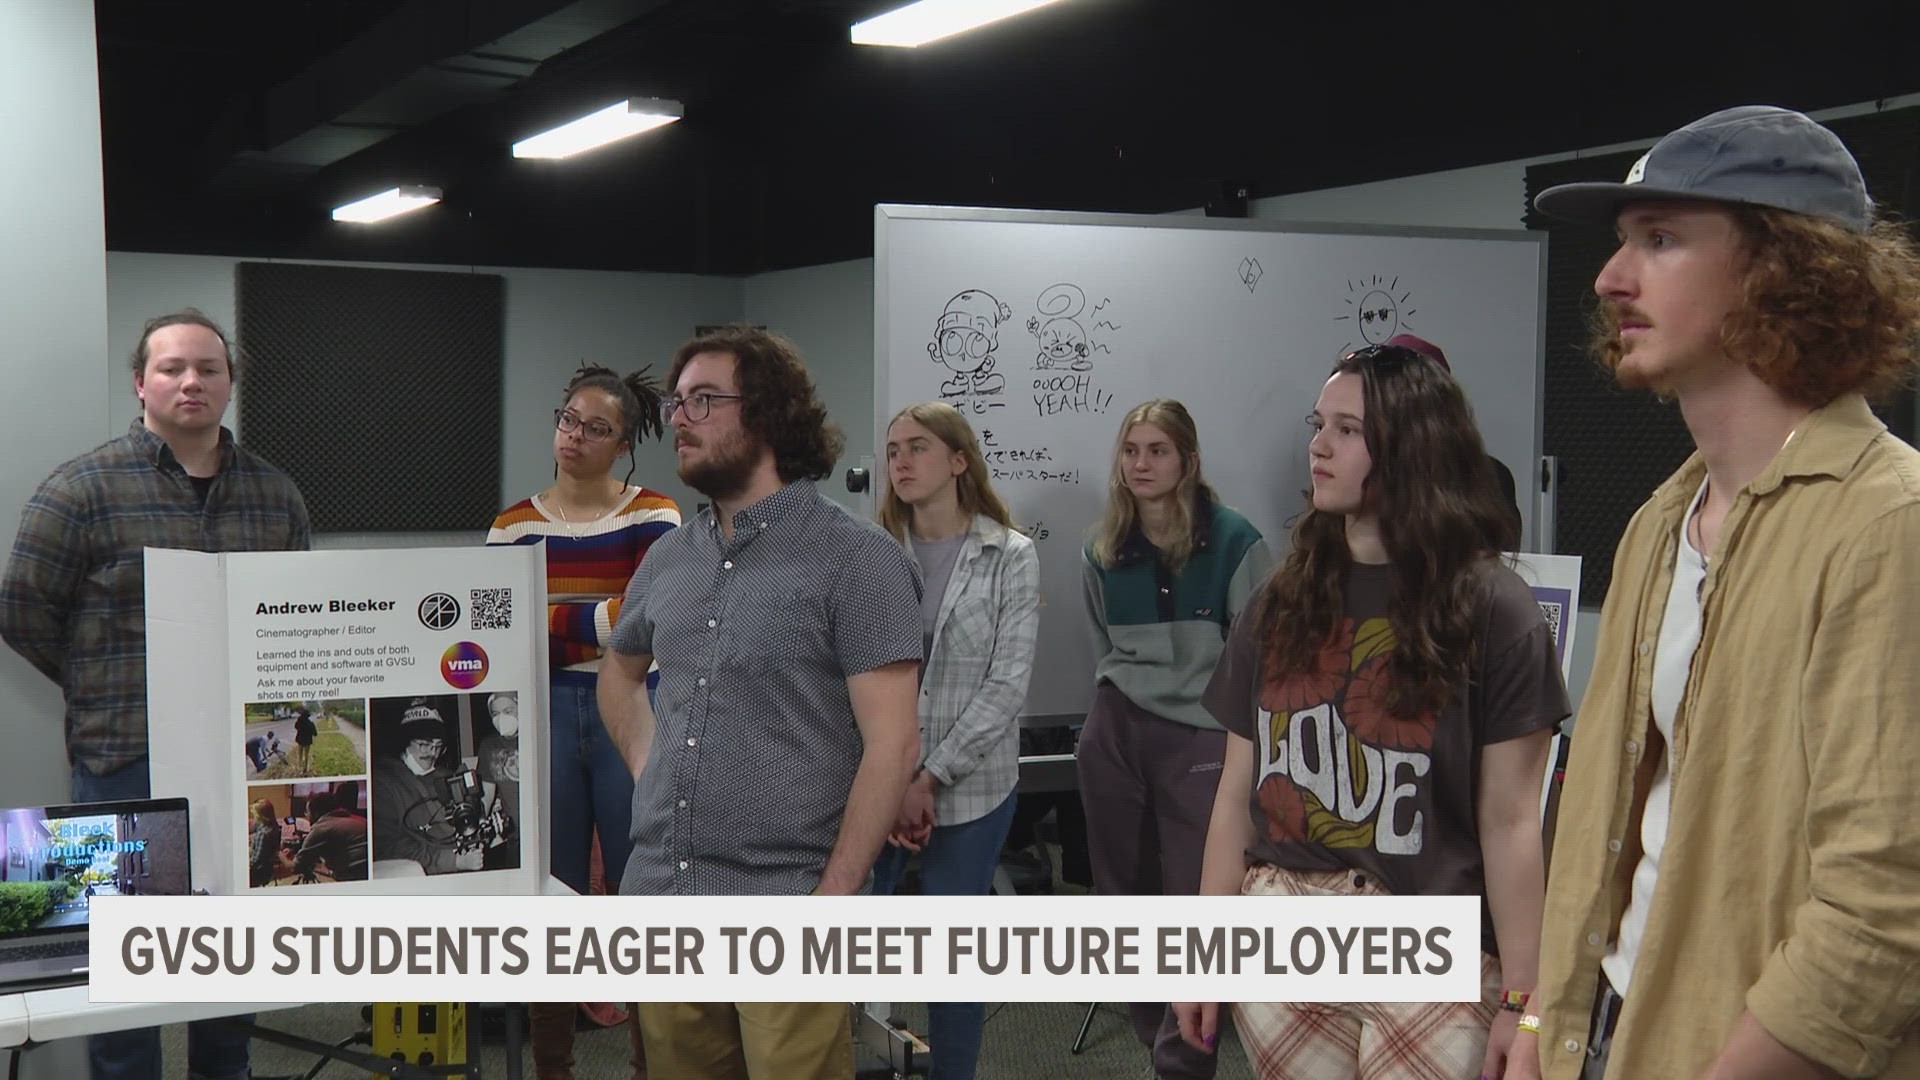 Many students across West Michigan are preparing to graduate from college this May. Some at GVSU got to meet with future employers.